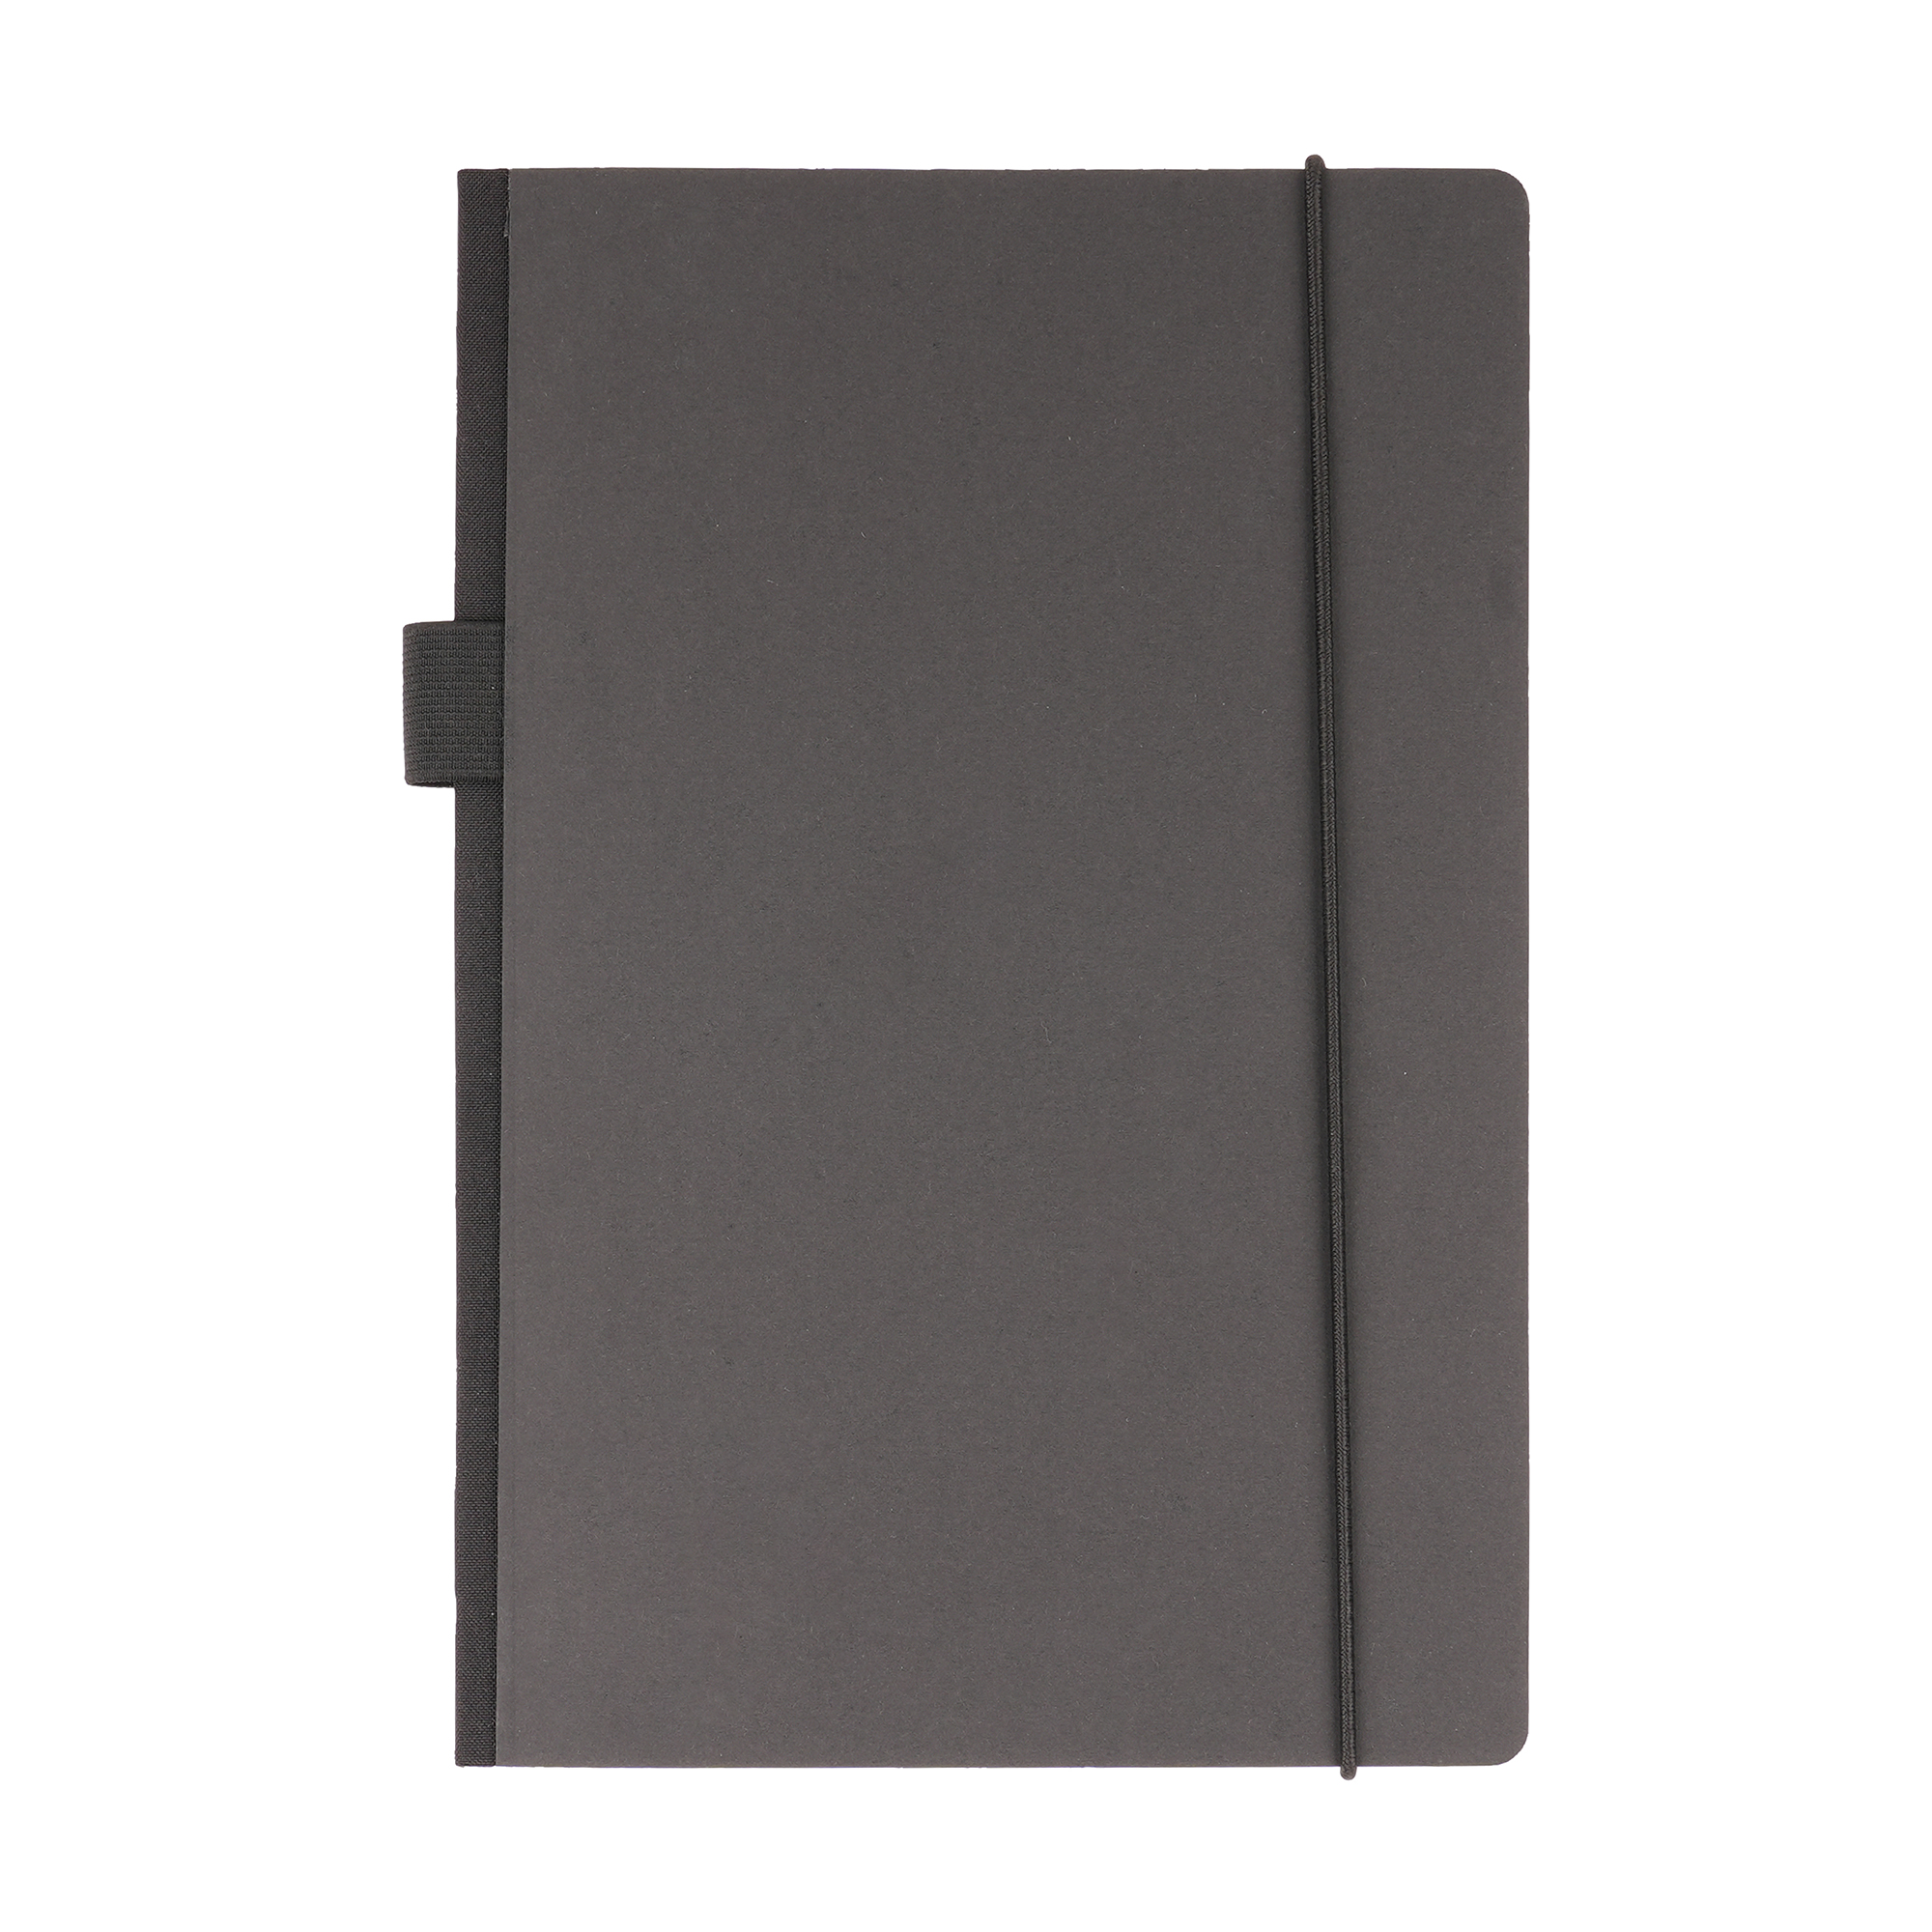 QS0363BK - A5 Hardcover Leather Notebook